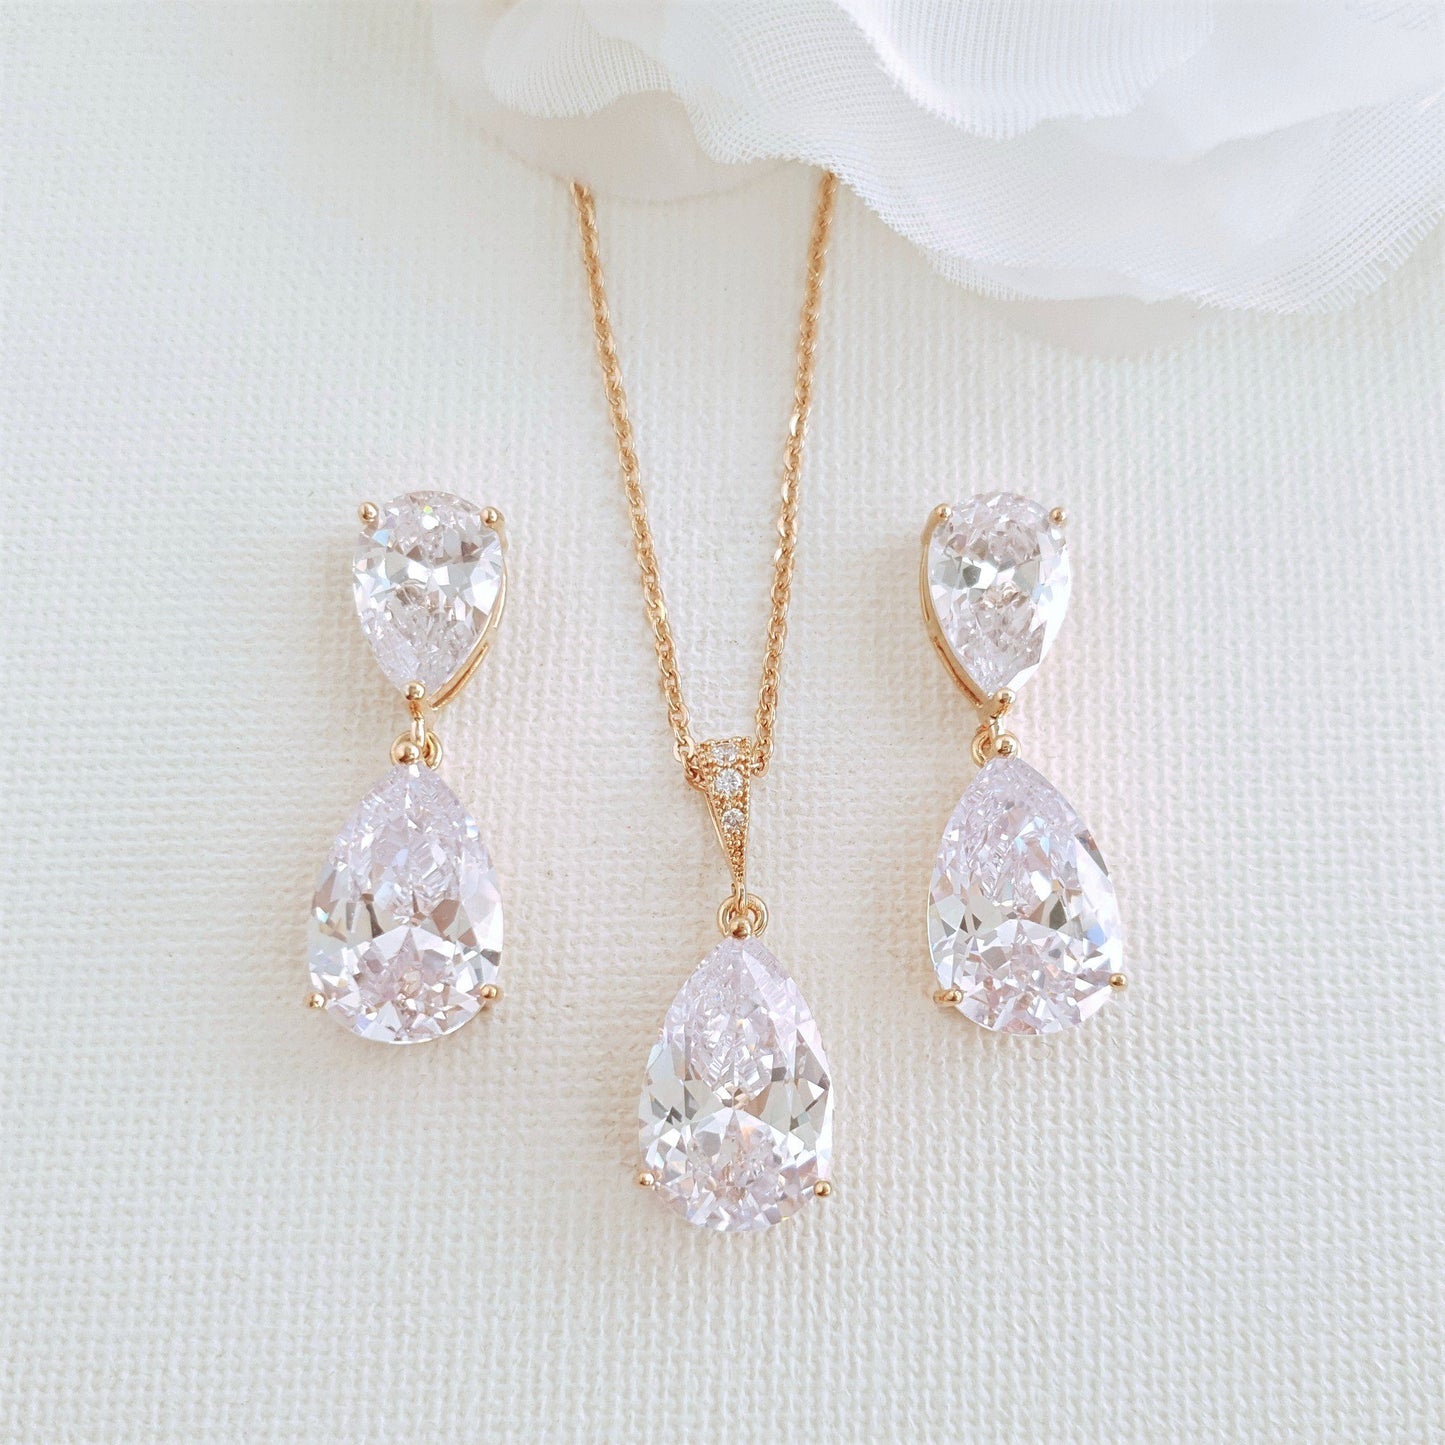 Rose gold Crystal Bridal Jewelry Set in Cubic Zirconia- Poetry Designs